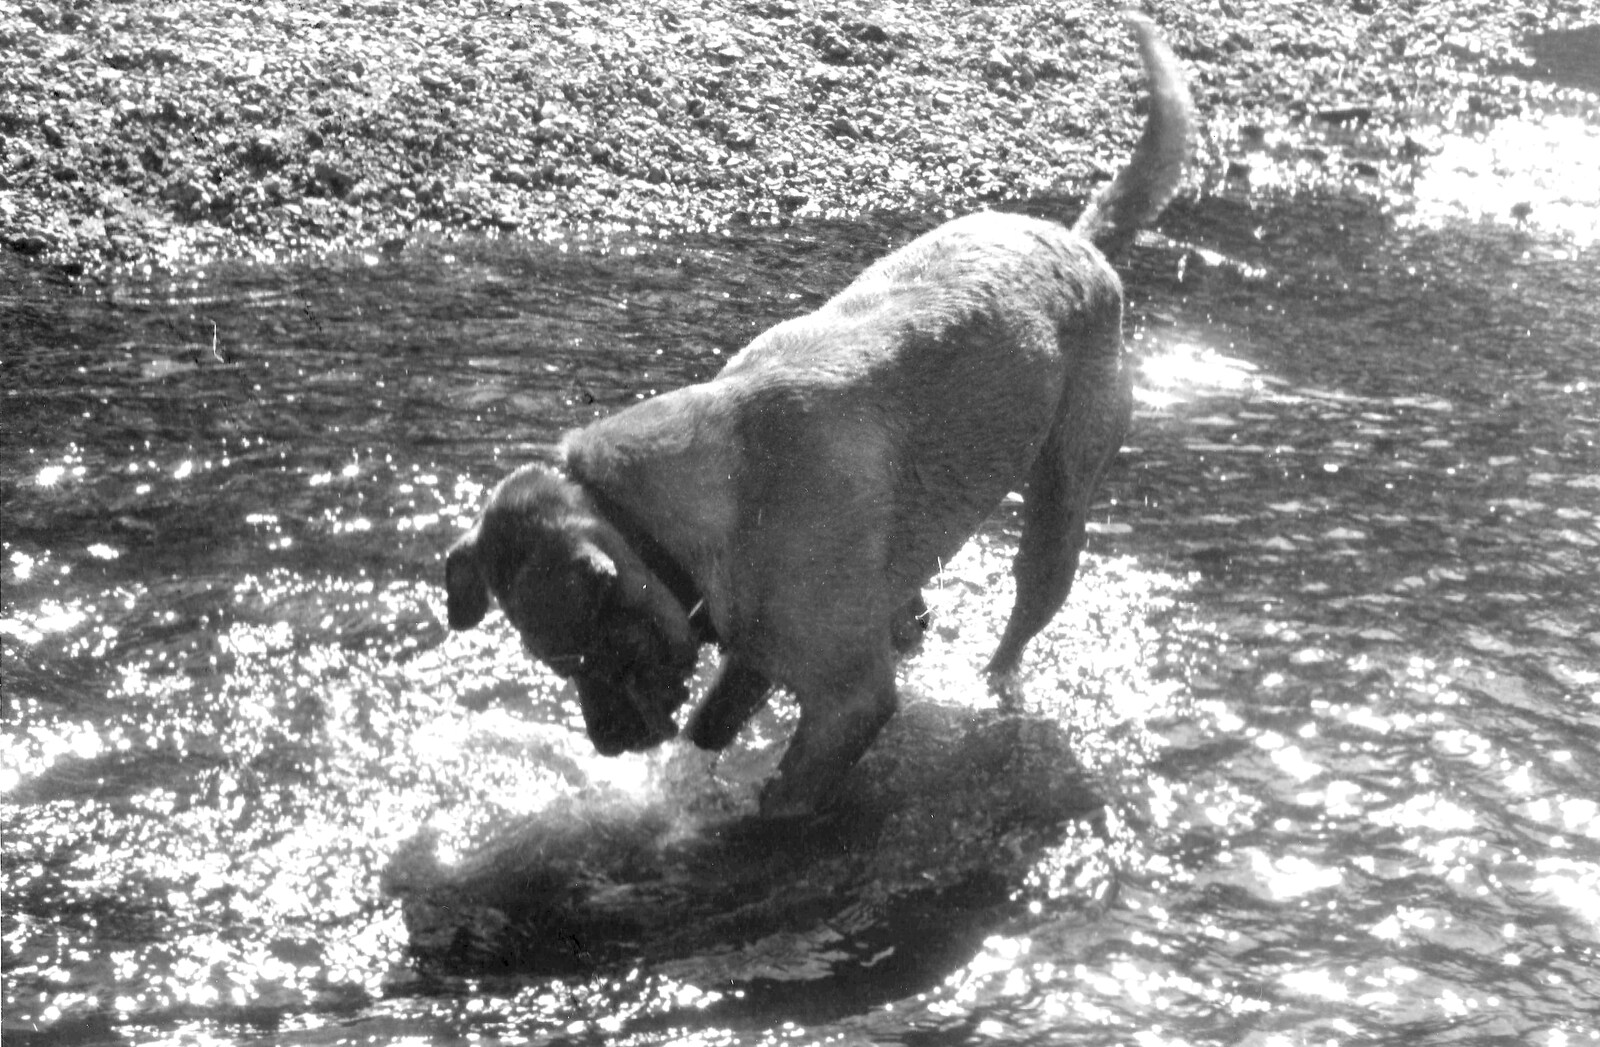 Geordie plays around in the river from The New Forest Marathon and Other Randomness, New Milton, Hampshire - 15th September 1985